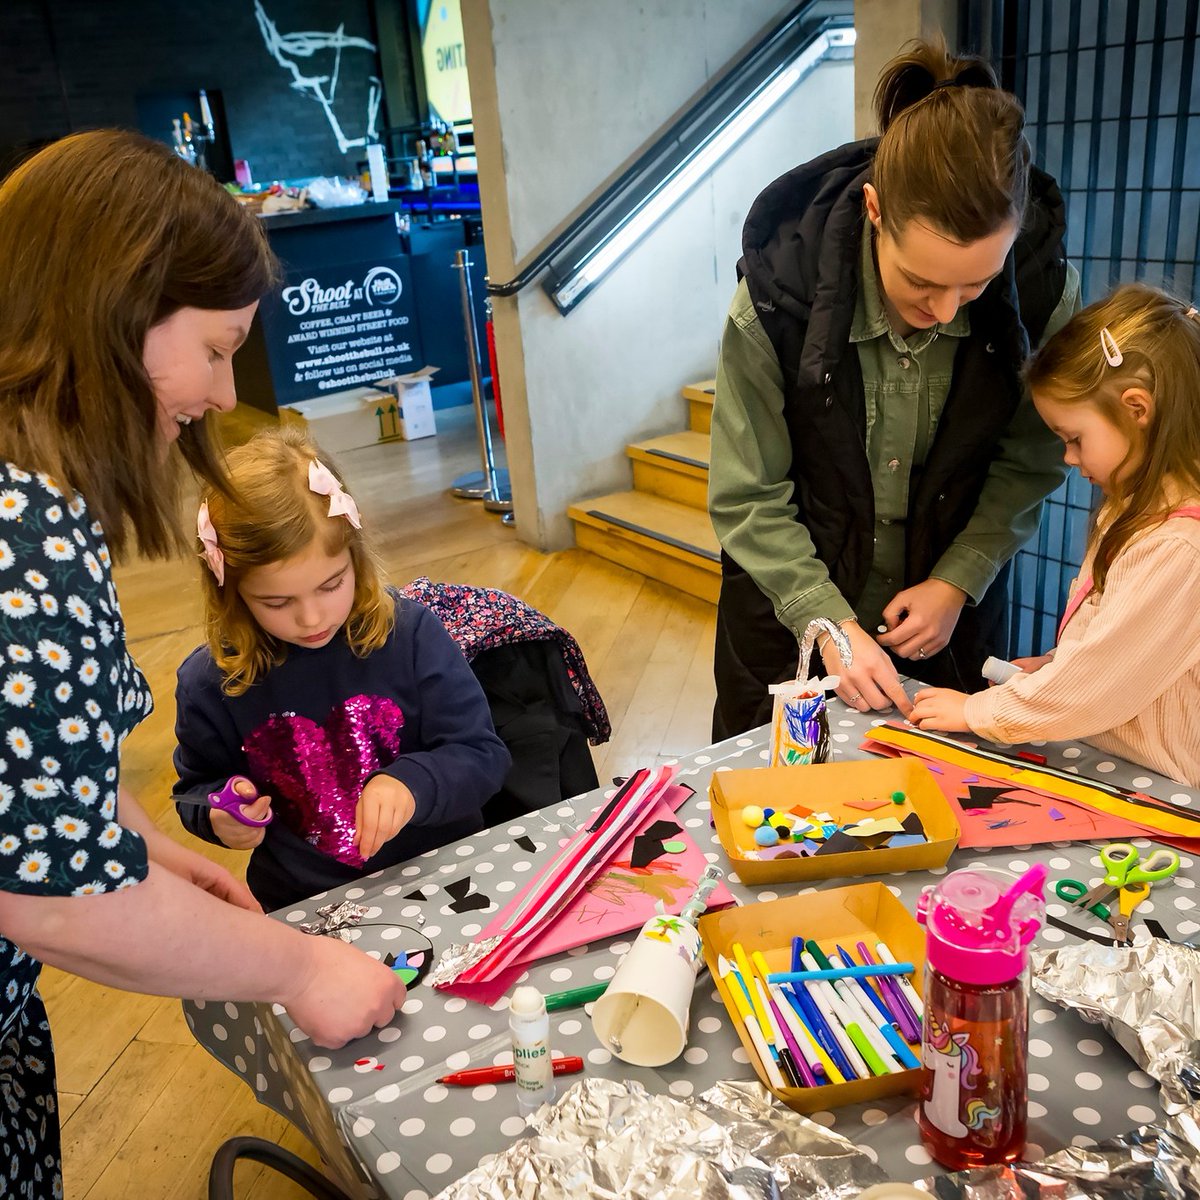 🎨 FREE Arts & Crafts for all the family! Our Family Open Day 2024 will once again include free arts & crafts as well as other fun activities between 11am & 3pm on Sat 11 May. No tickets needed, just show up & get involved. 🎭 Visit bit.ly/3PZnWn2 🔗 #Hull #HTT